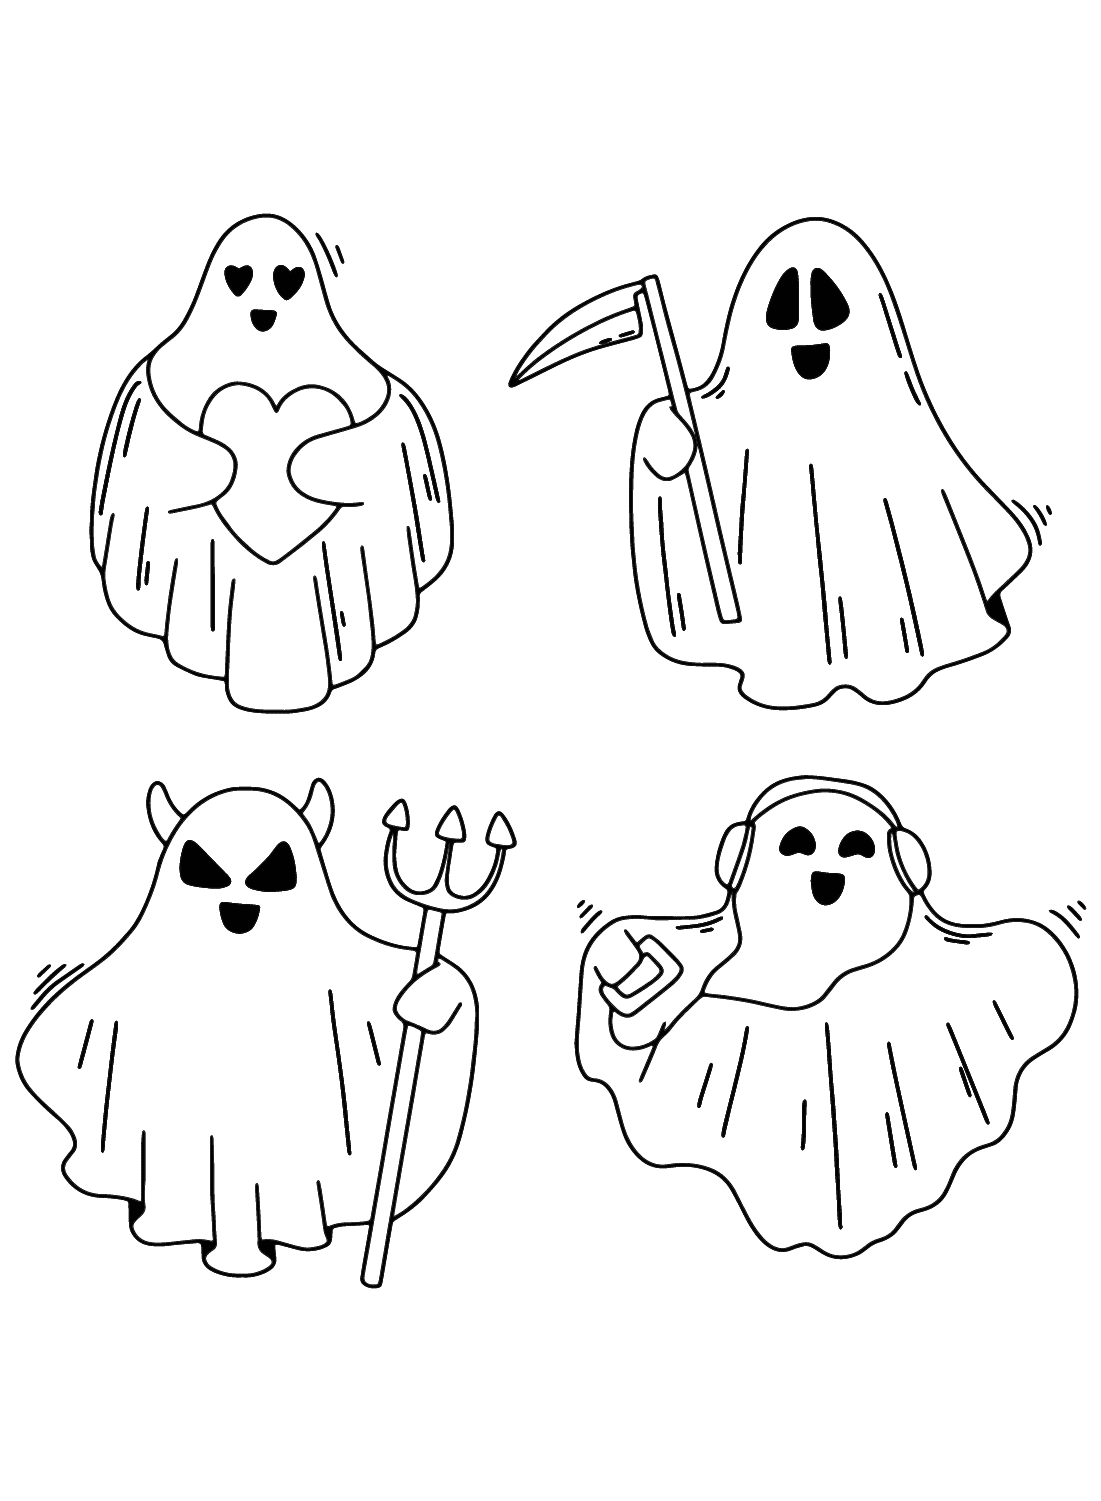 Ghost Printable Coloring Page - Free Printable Coloring Pages